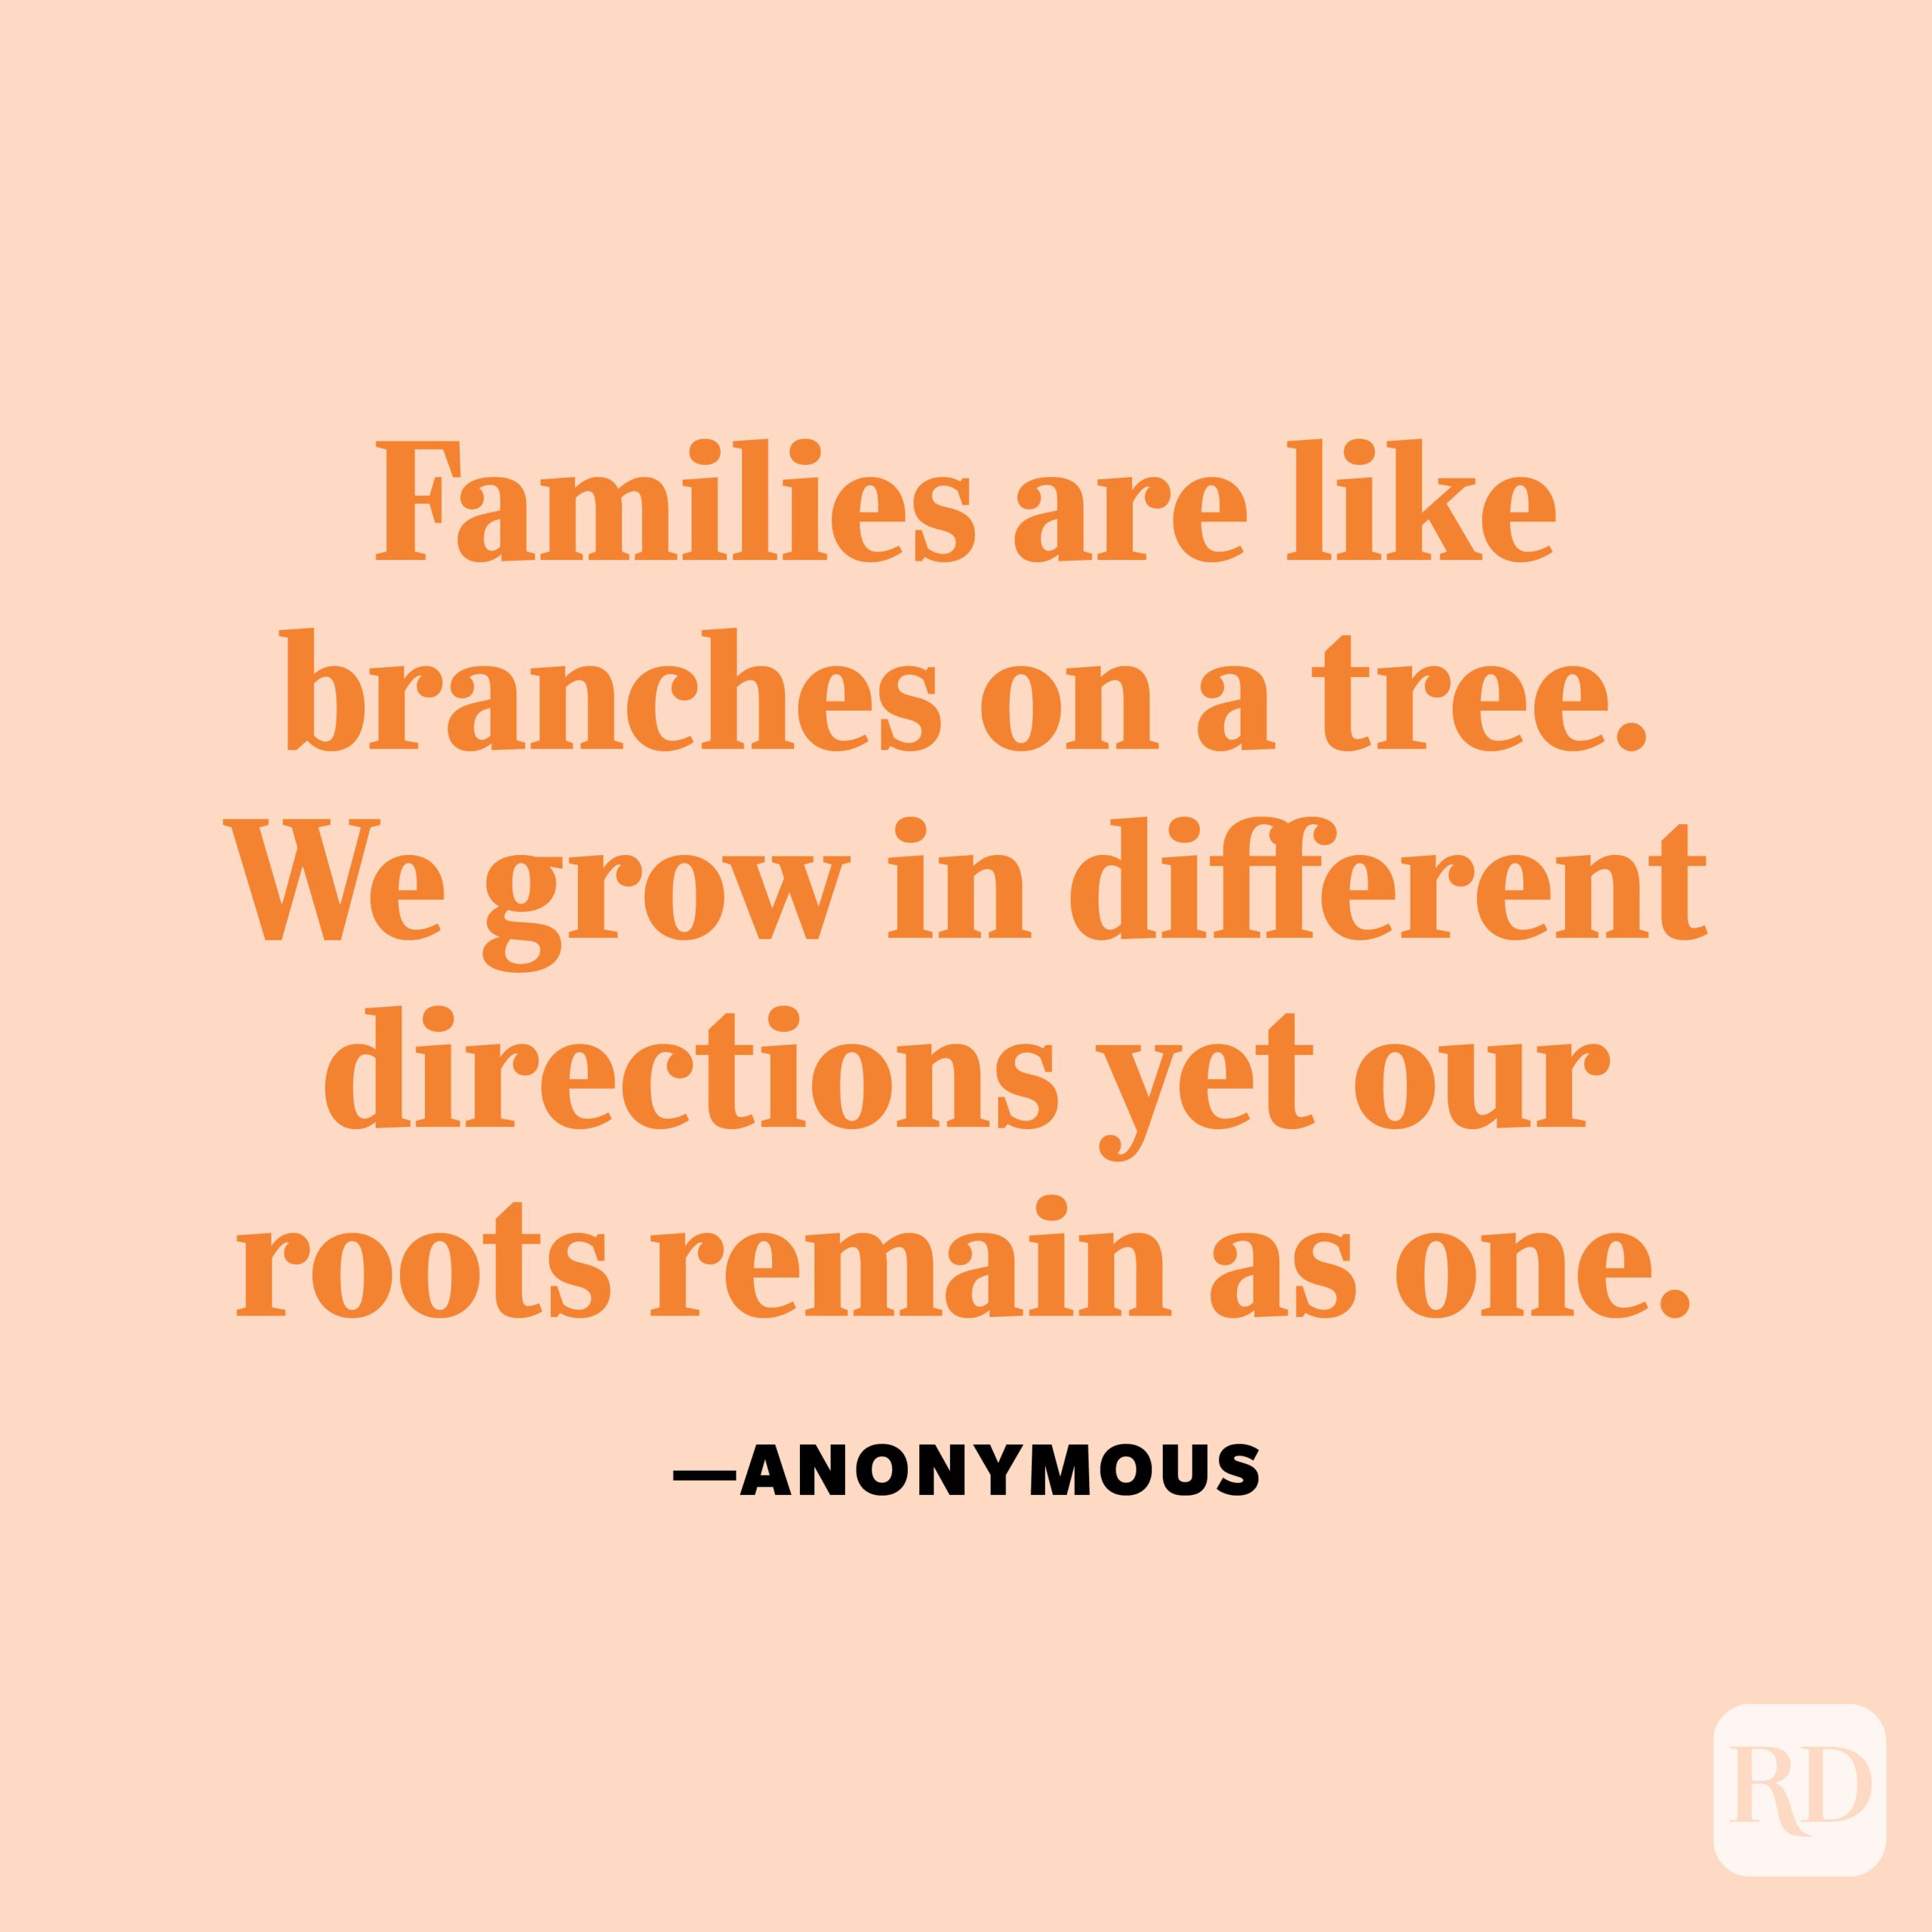 "Families are like branches on a tree. We grow in different directions yet our roots remain as one." —Anonymous